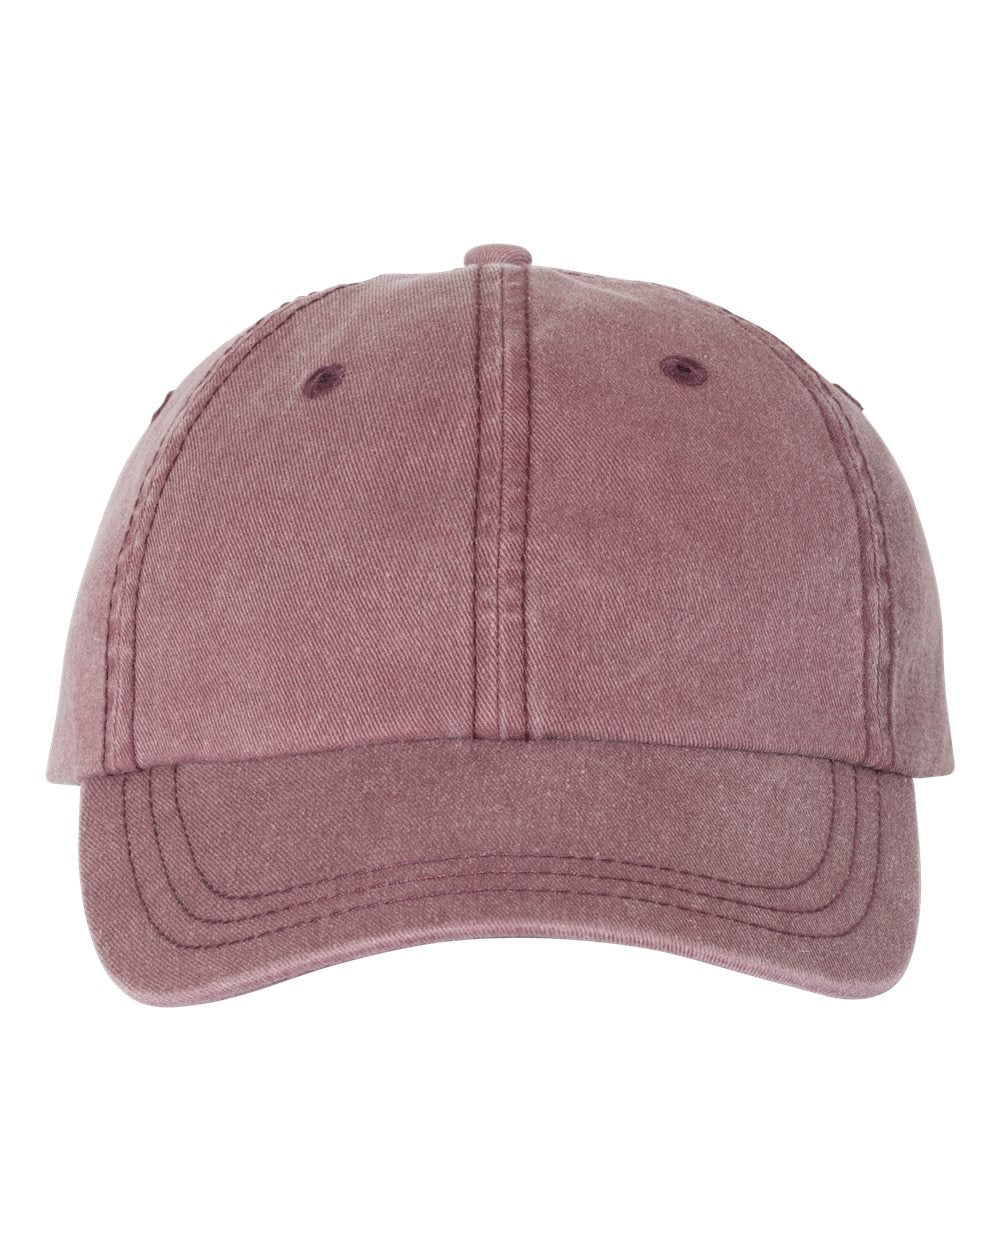 Adult Pigment-Dyed Cap, Maroon